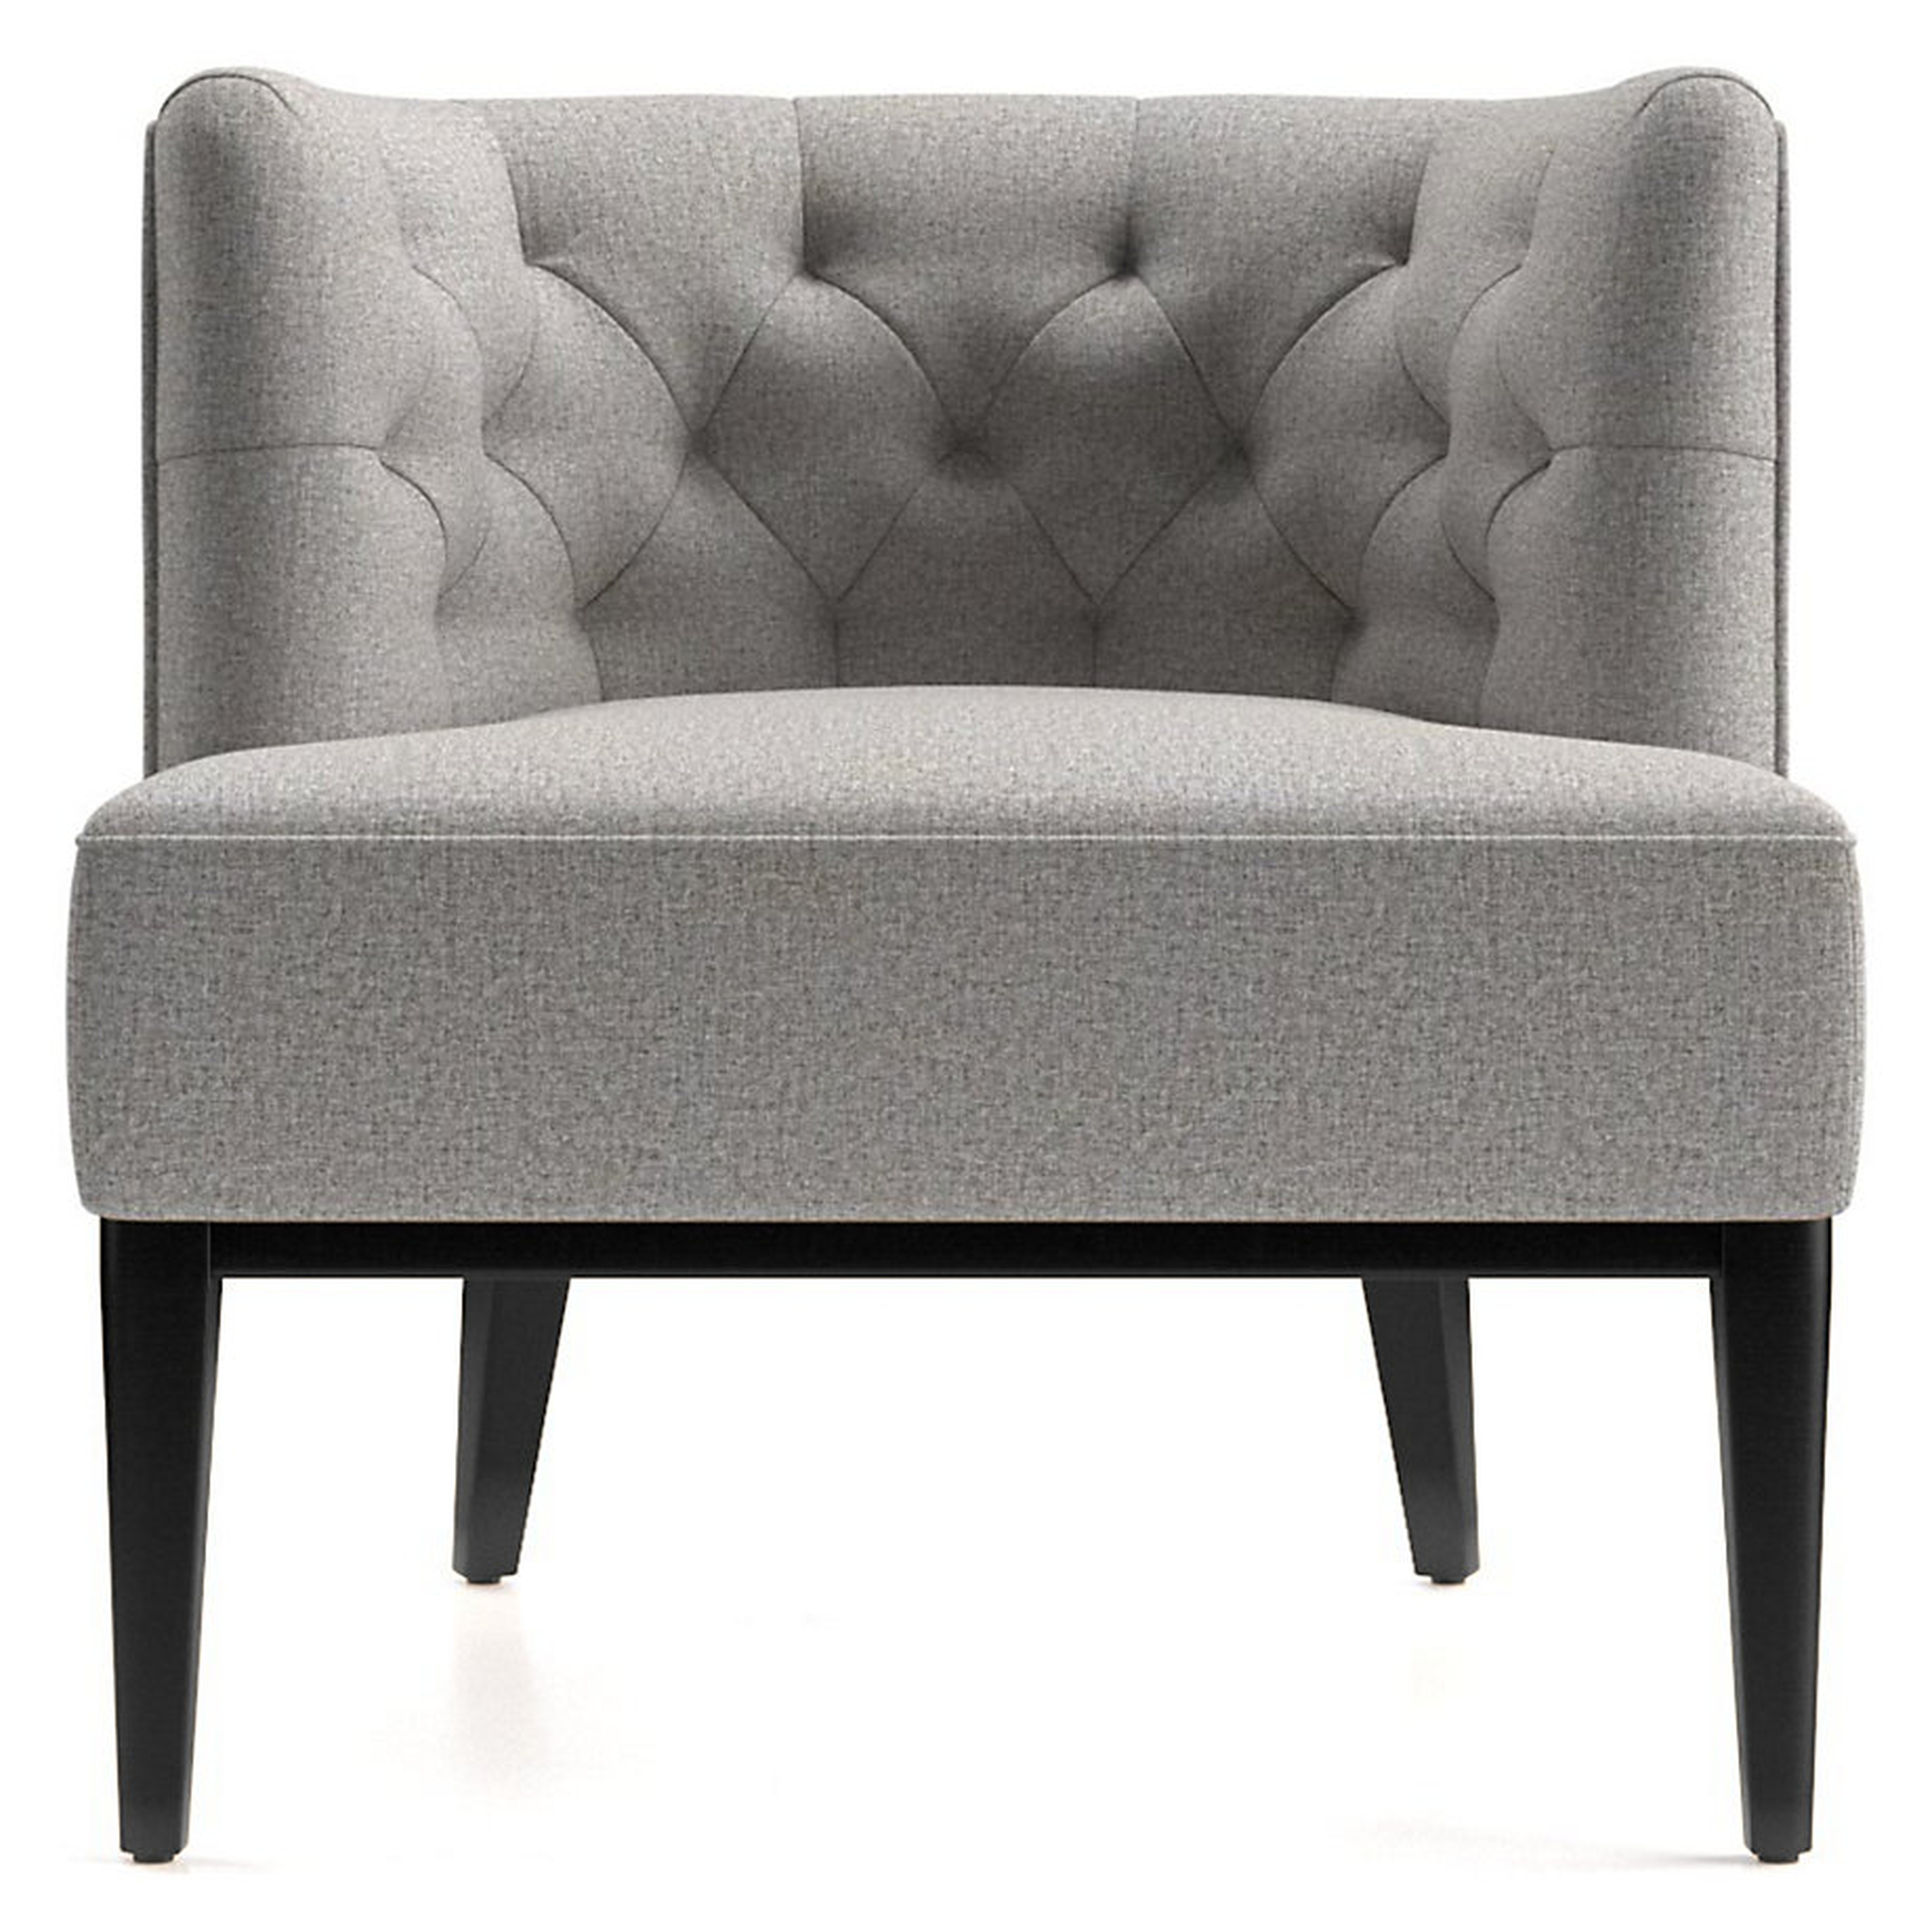 Grayson Tufted Chair - Crate and Barrel